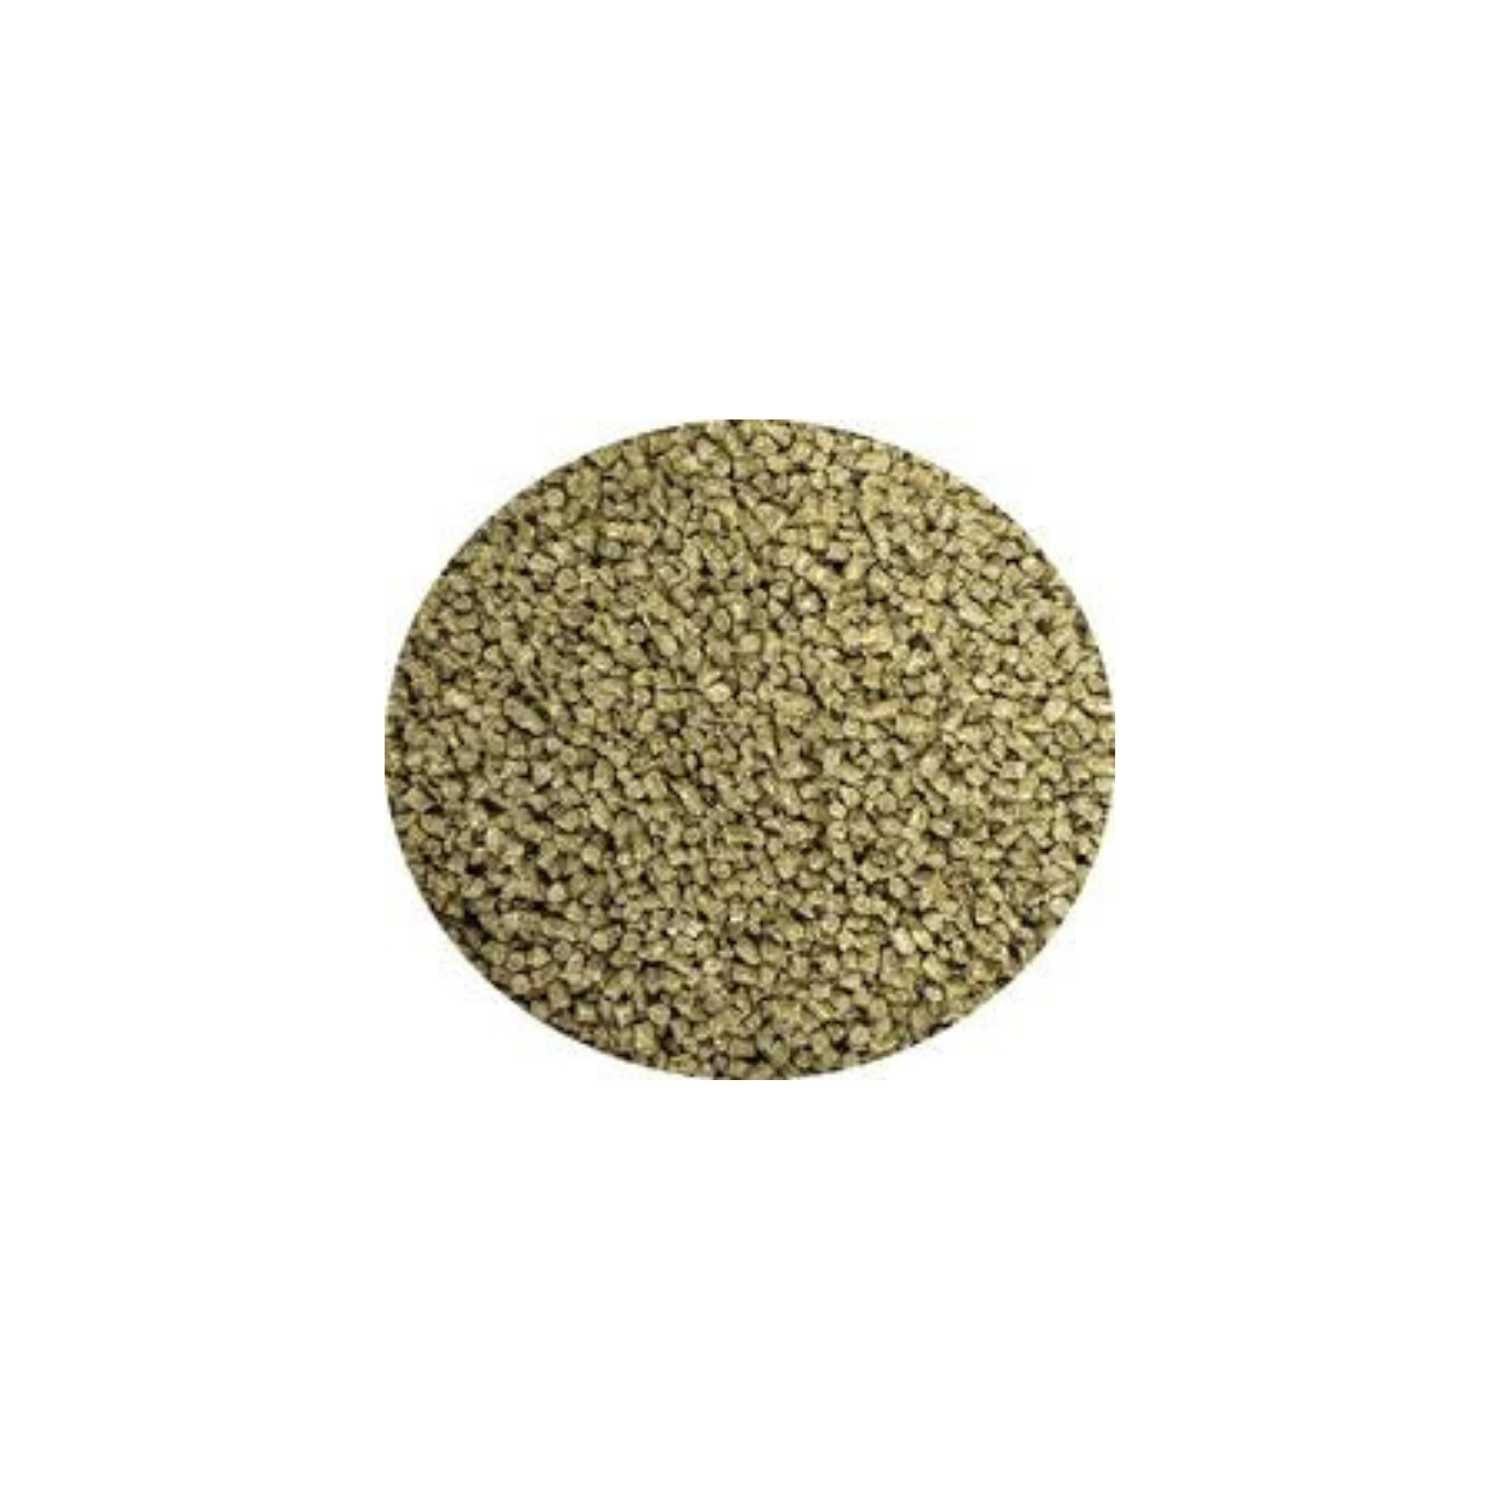 TOP's Parrot Food - Mini Pellets for Small Birds (3 Sizes)